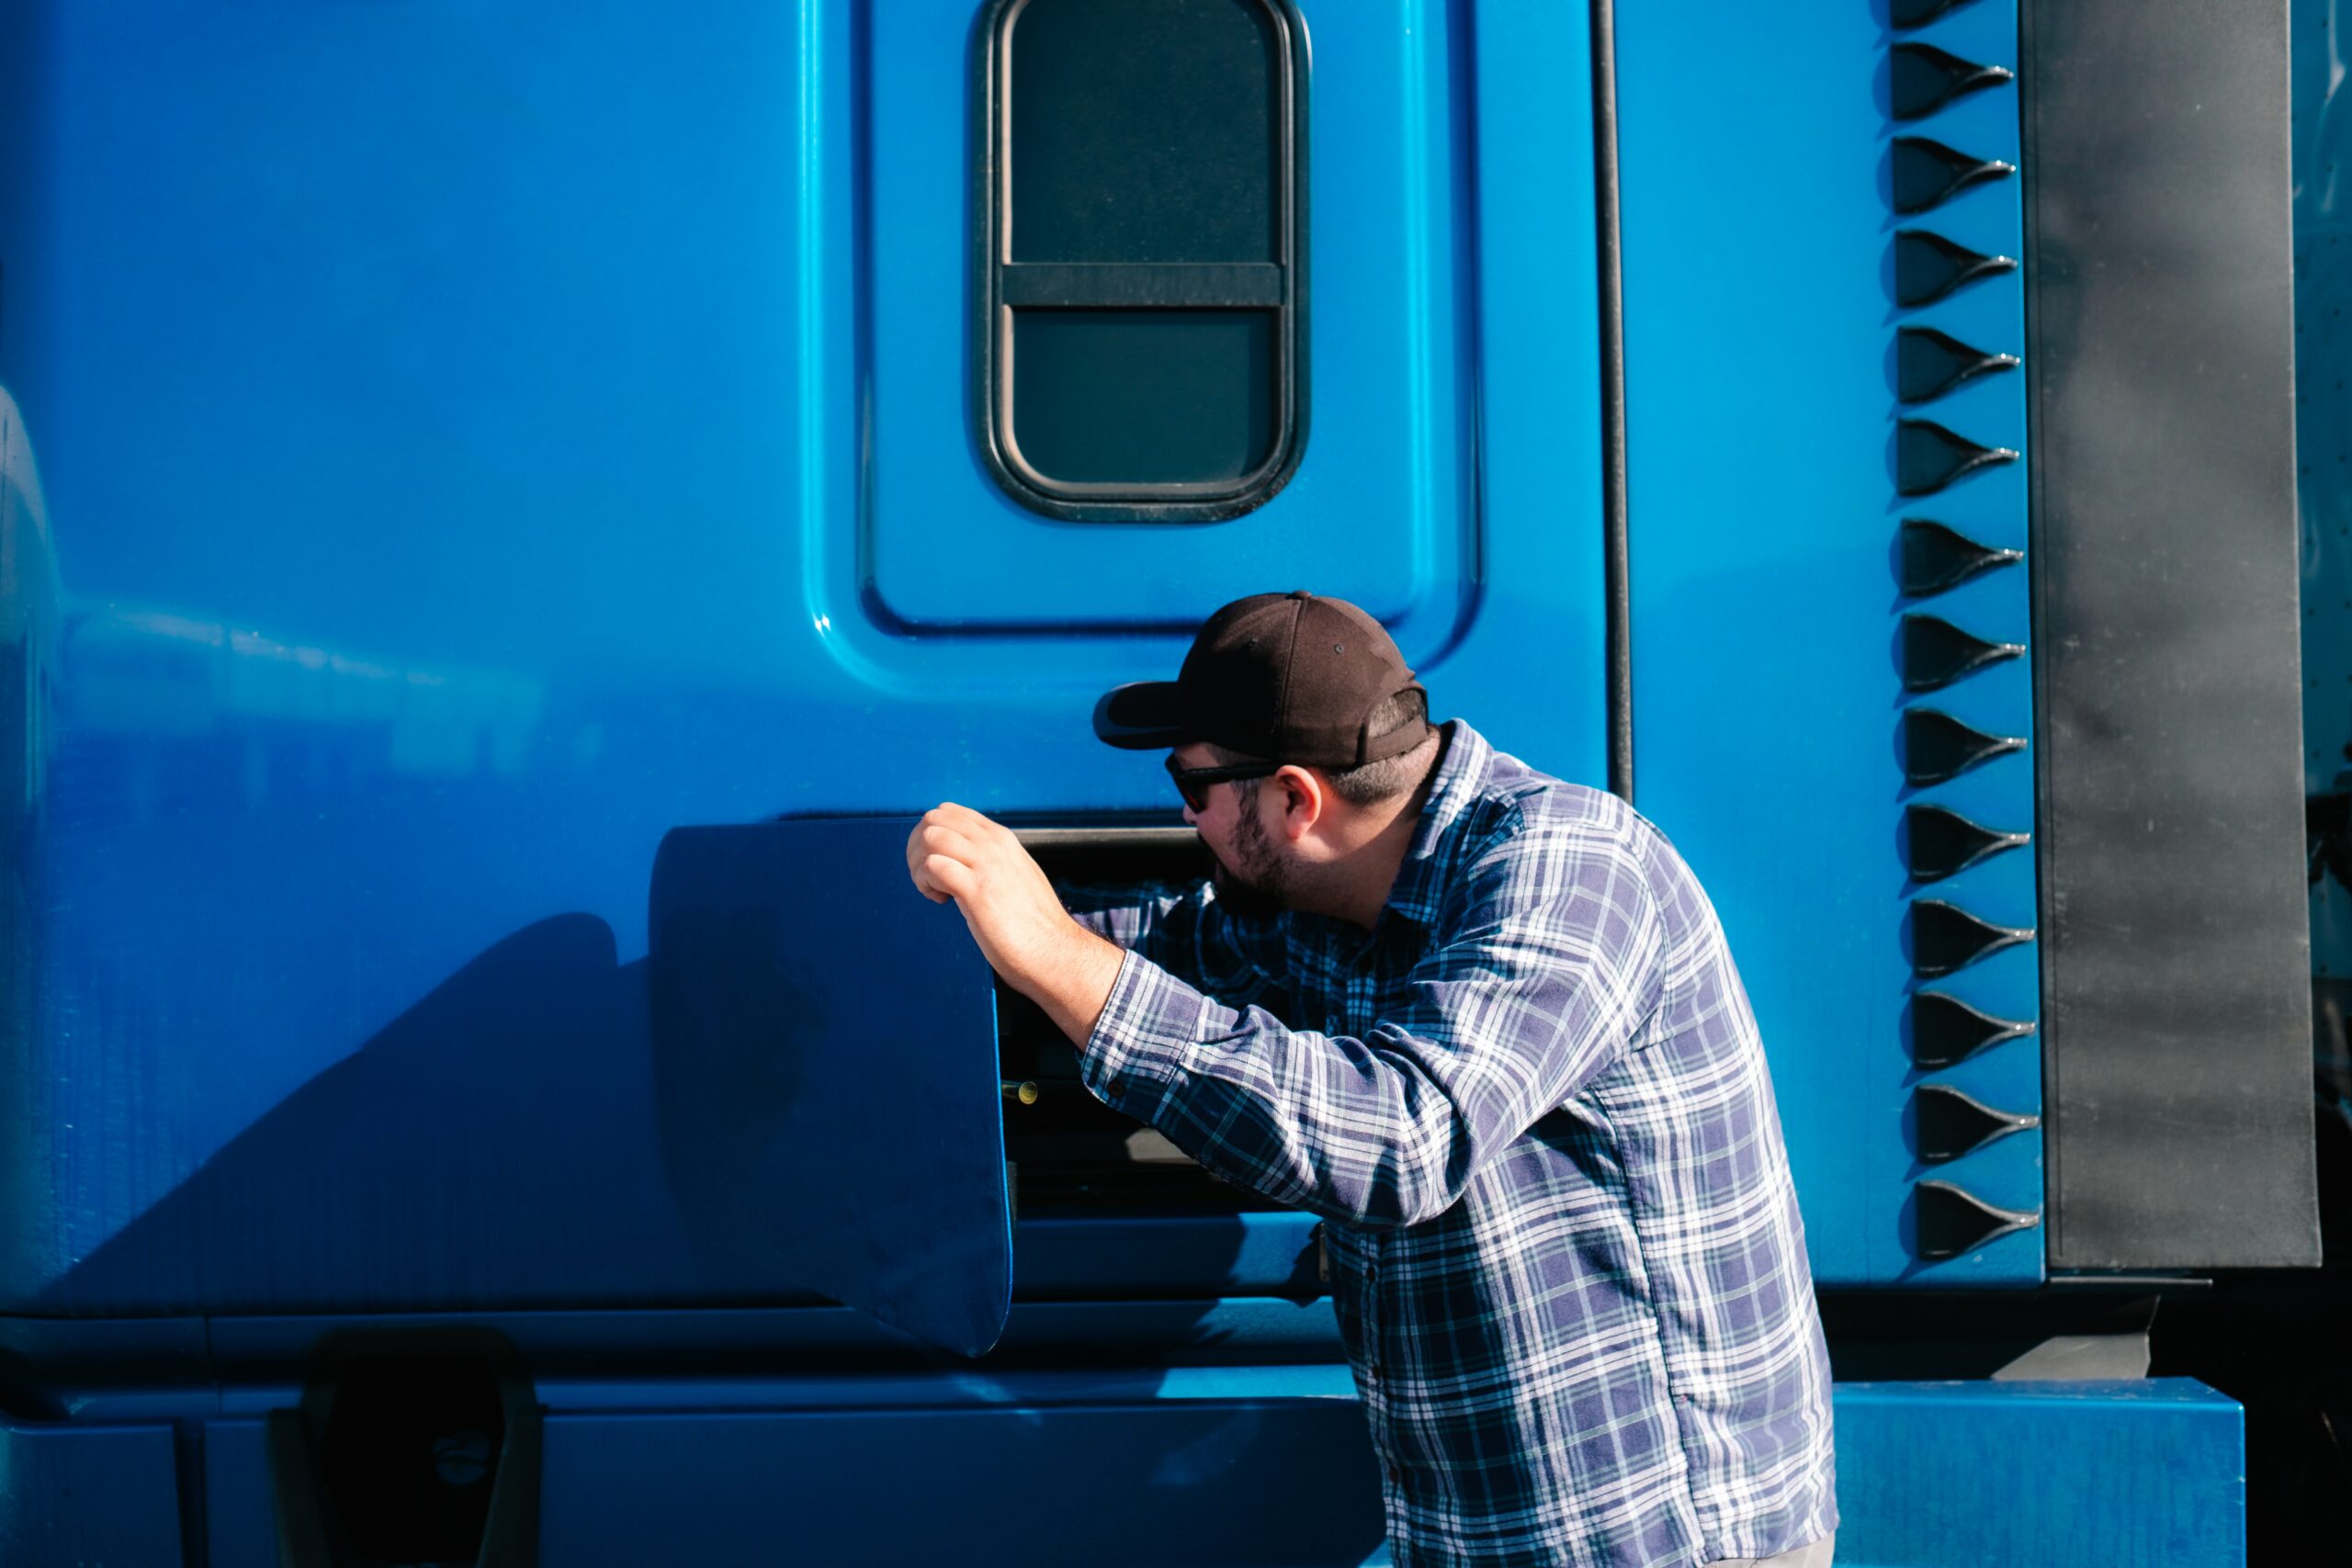 A man opening the door of a blue semi truck equipped with GPS tracker dash cam.